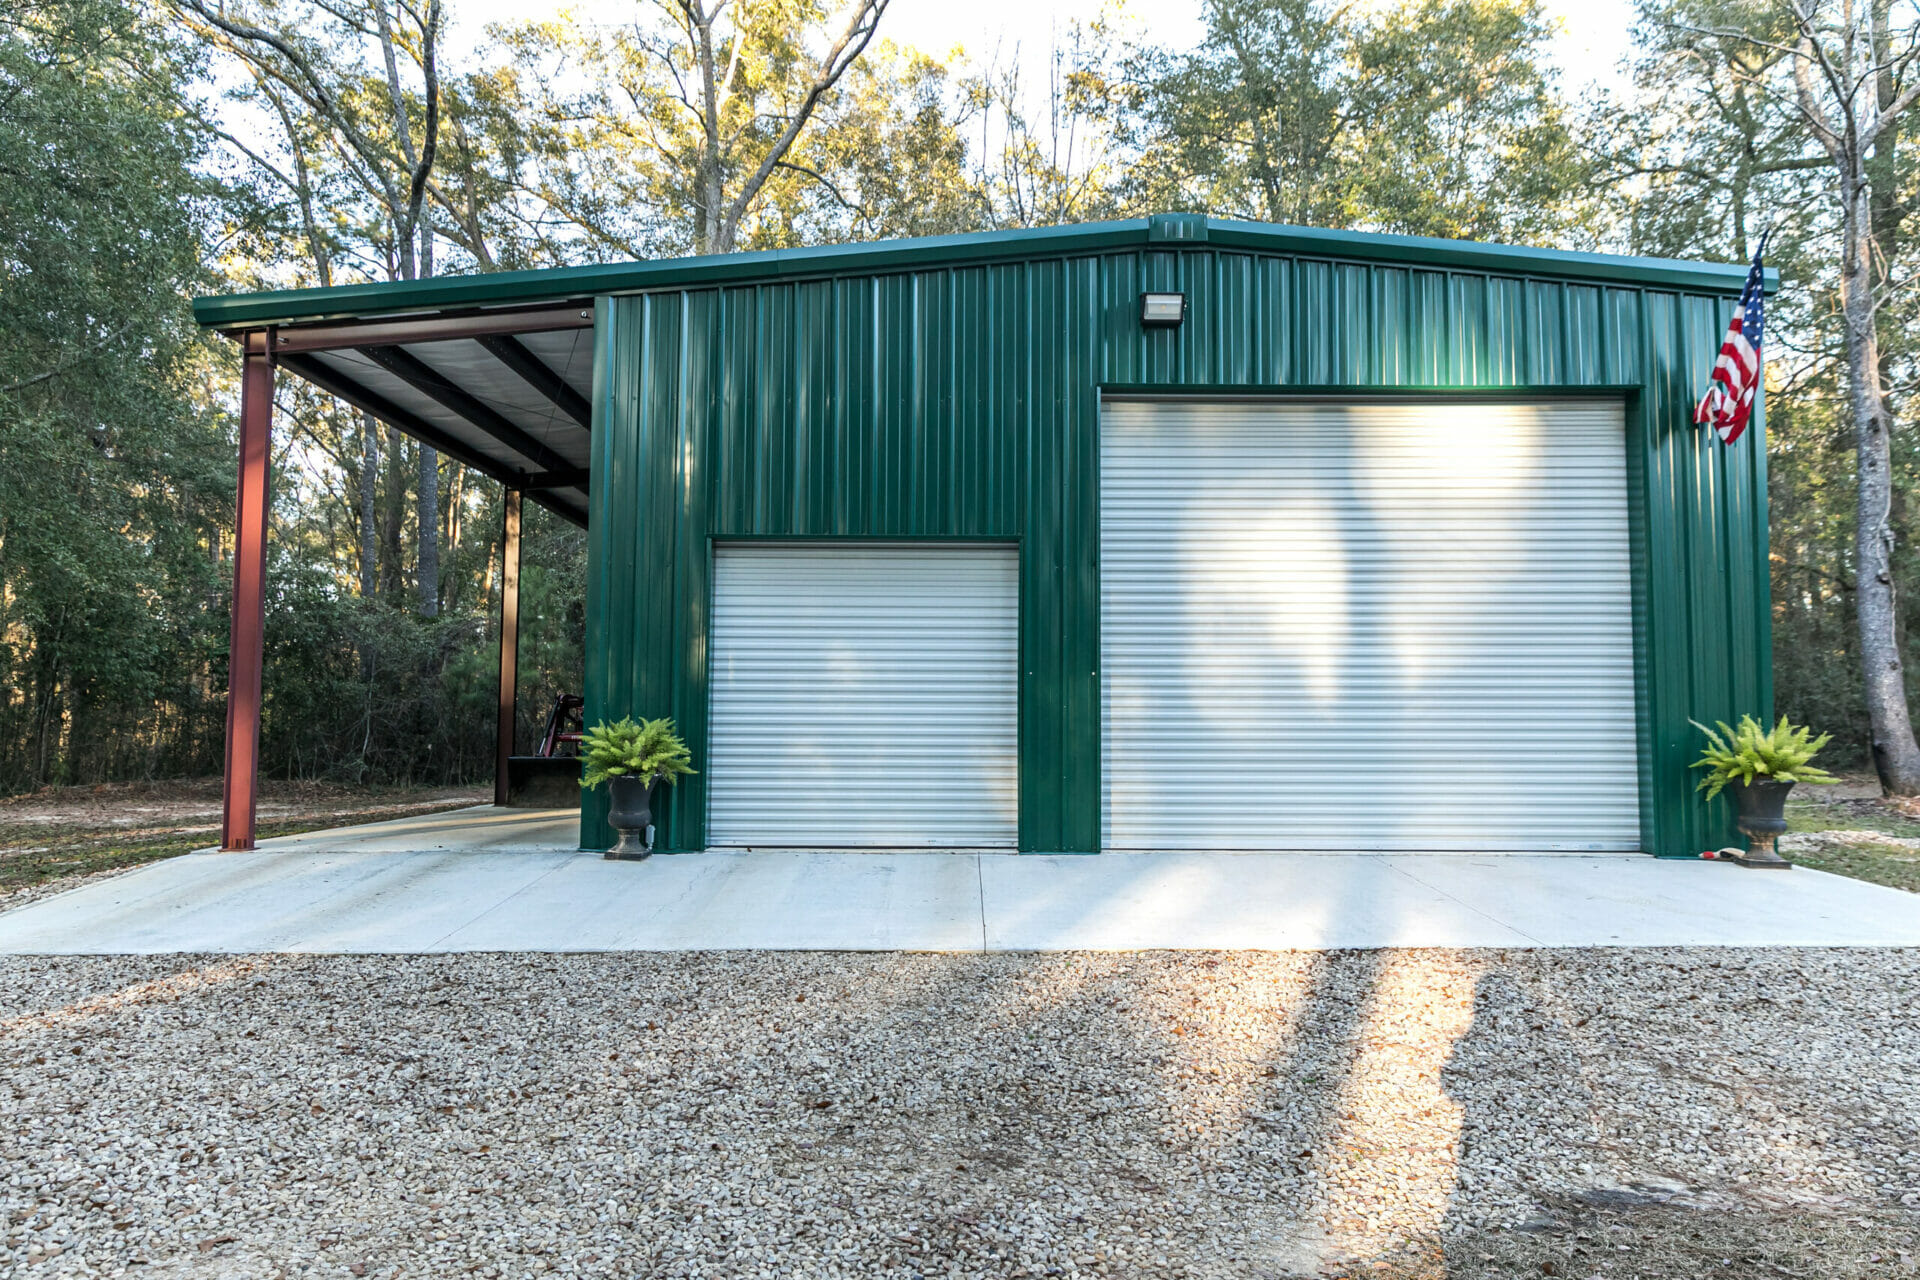 Large green outdoor metal building on a spacious rural property for storage, cars, garage items and a riding lawn mower